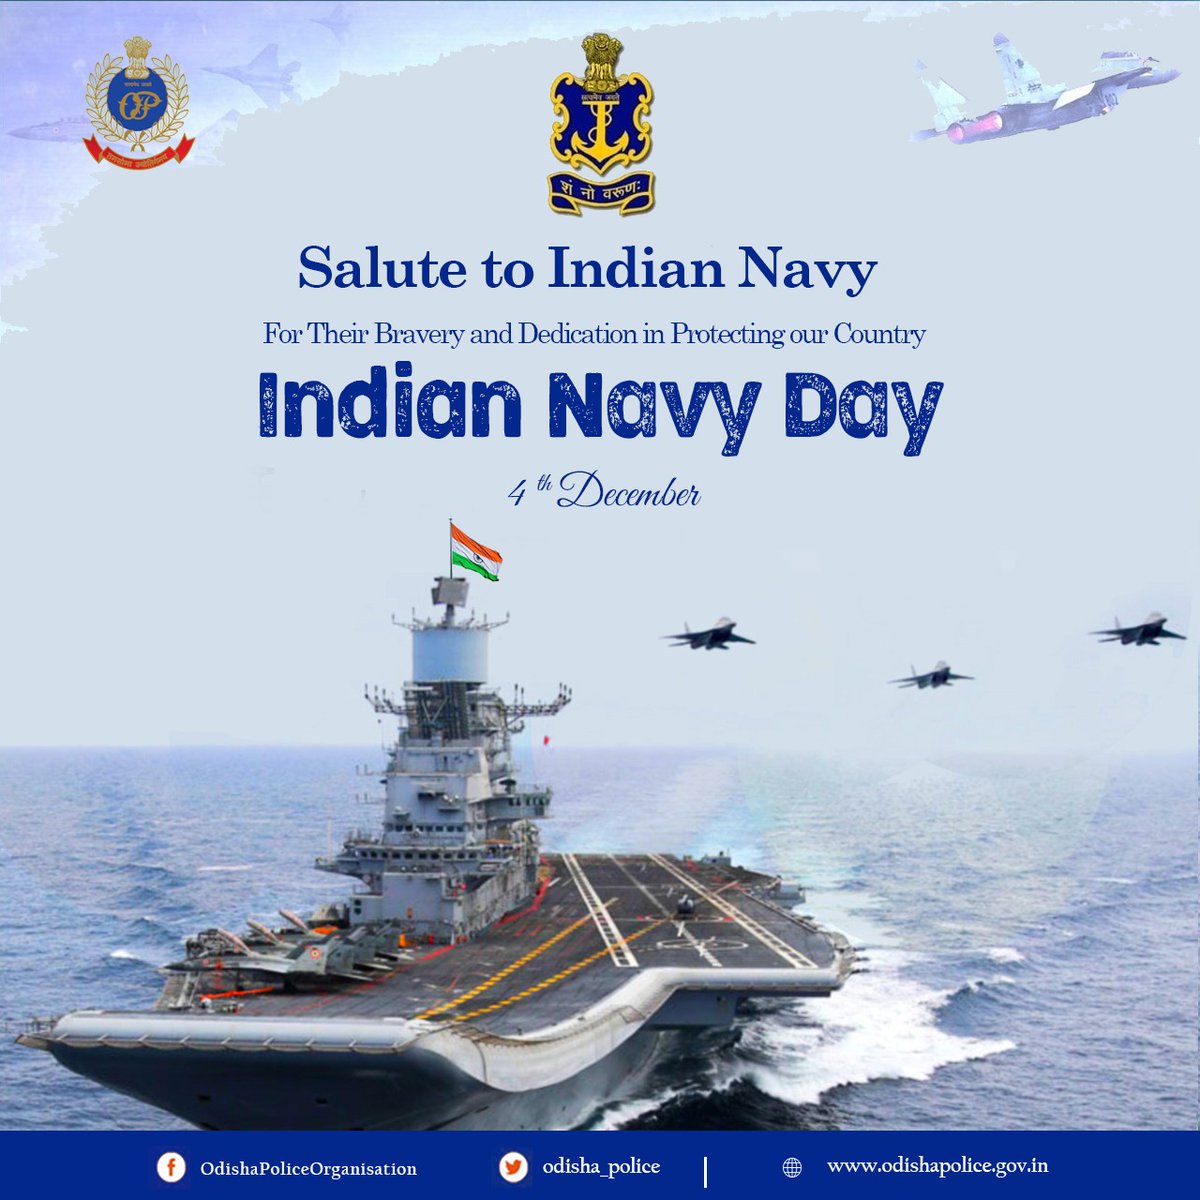 Warm wishes to all the brave personnel & families of the IndianNavy on this momentous occasion of #IndianNavyDay! We salute your unwavering commitment & exemplary courage in safeguarding our nation's maritime borders. Your dedication & valor are an inspiration to us all. Jai Hind